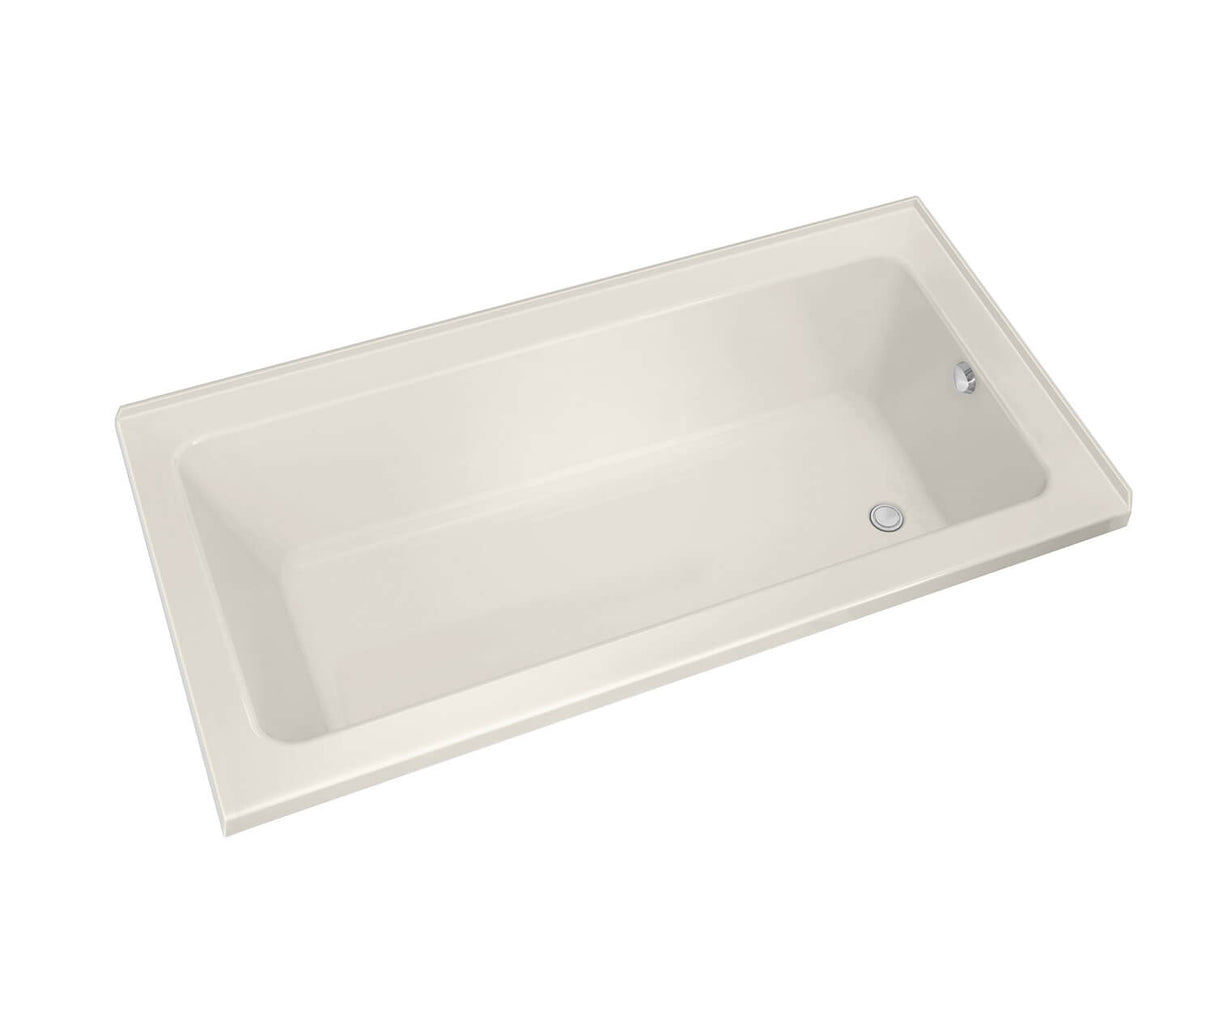 MAAX 106206-R-097-007 Pose 6632 IF Acrylic Corner Right Right-Hand Drain Combined Whirlpool & Aeroeffect Bathtub in Biscuit